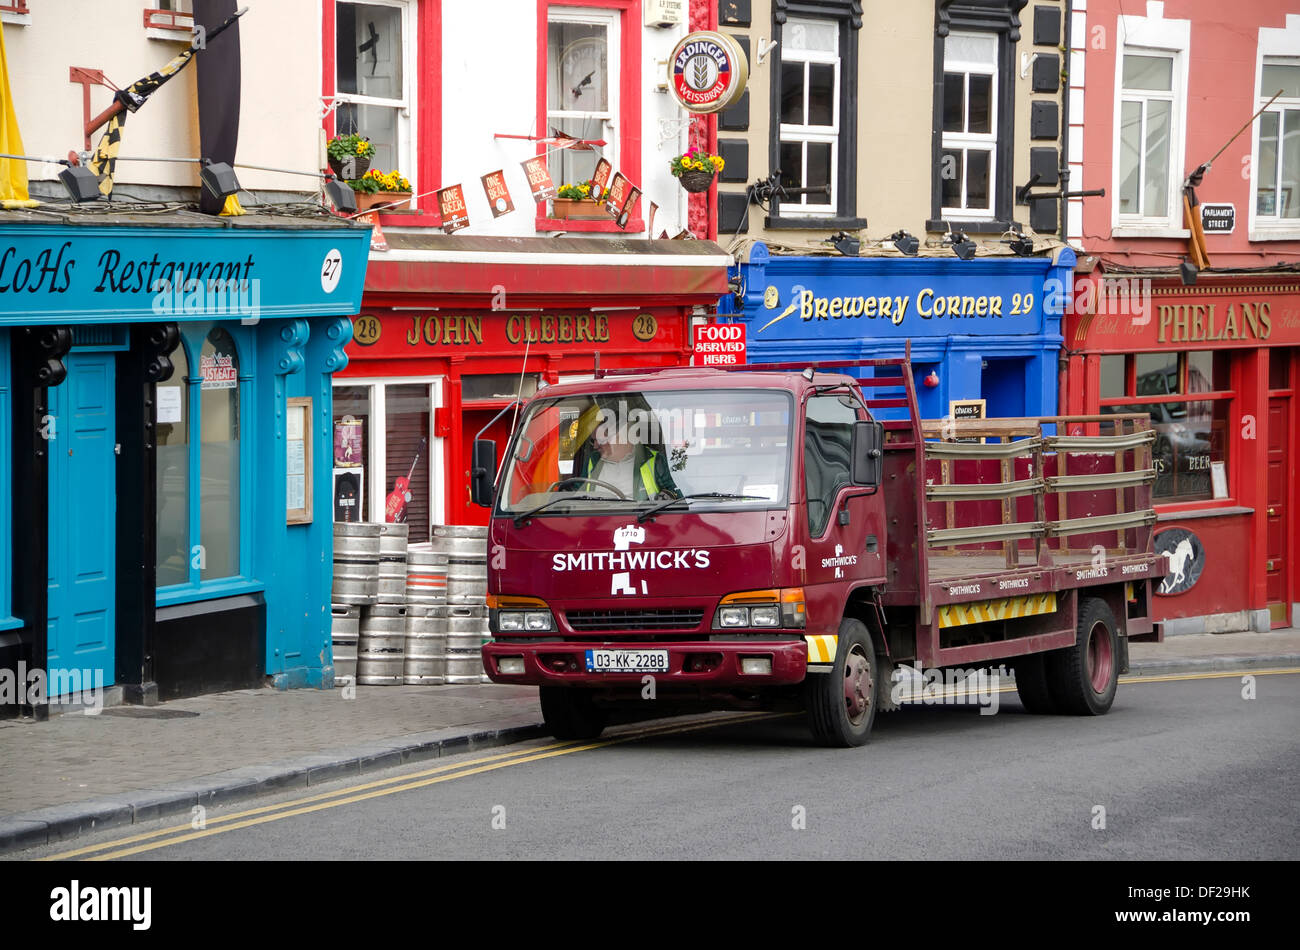 Smithwick's delivery truck in front of pubs in Kilkenny, home of Smithwick's brewery, Ireland. Stock Photo